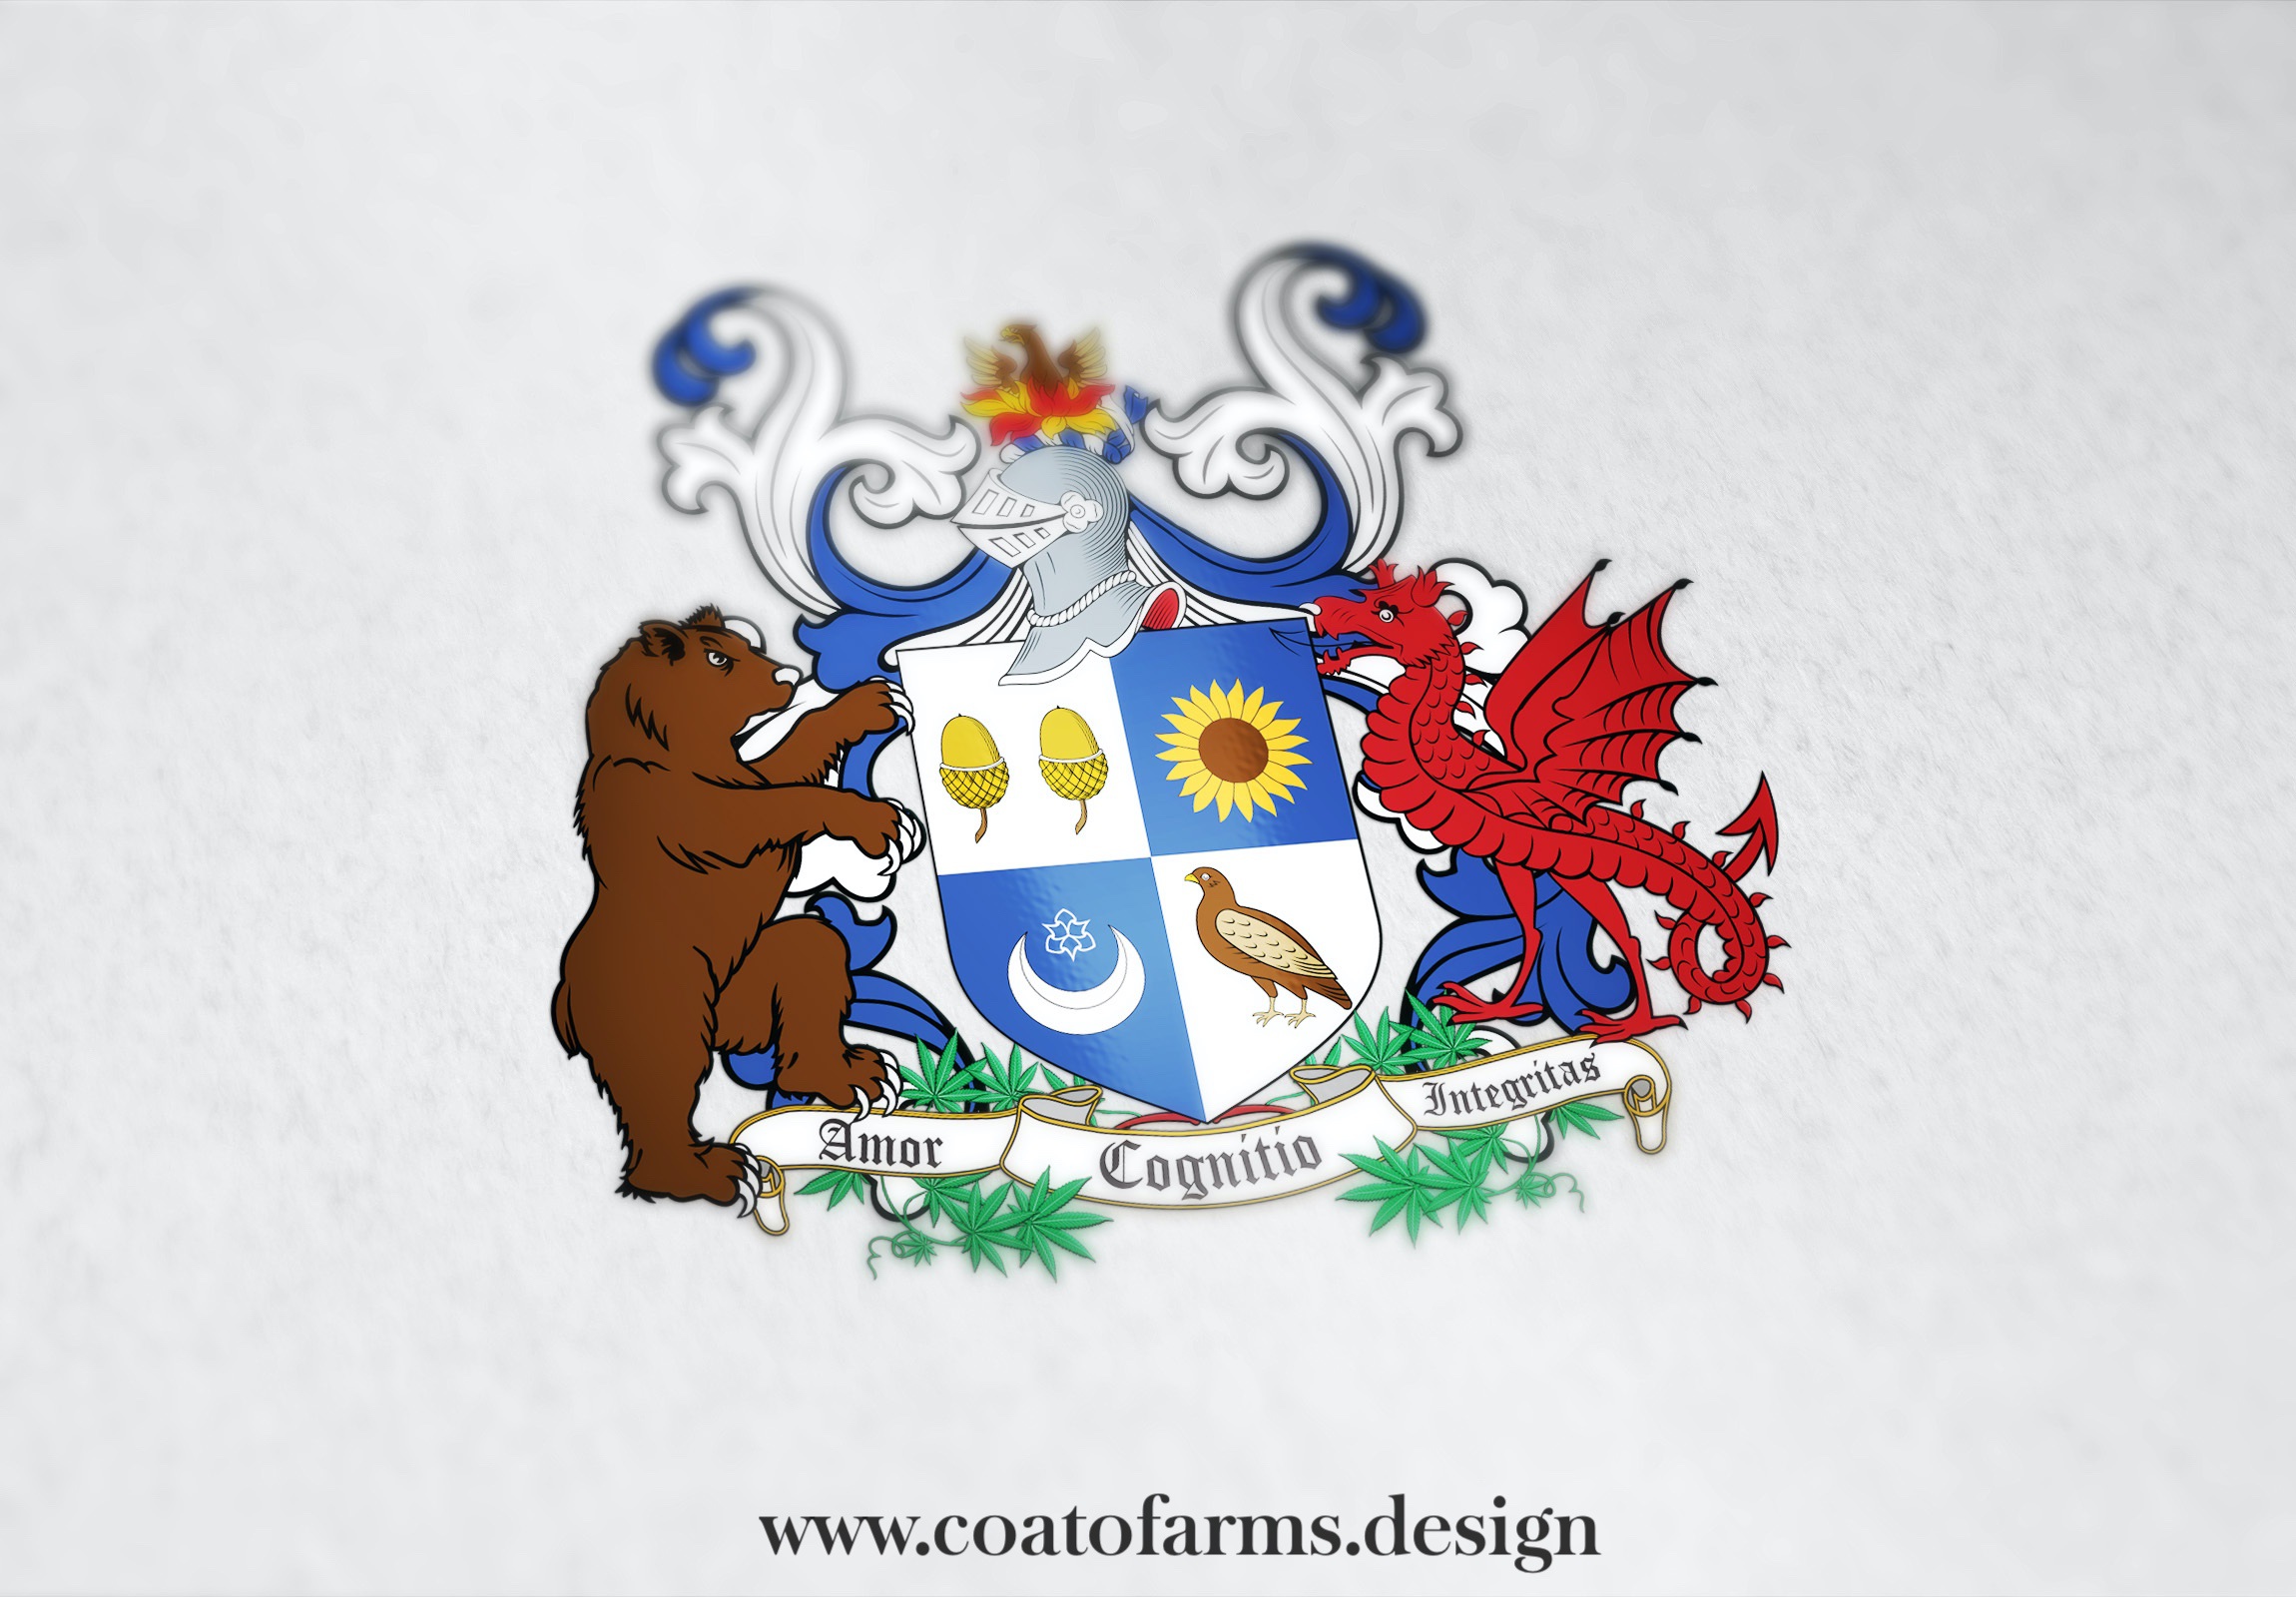 Coat of arms I designed for a client from the United Kingdom, with a red wyvern